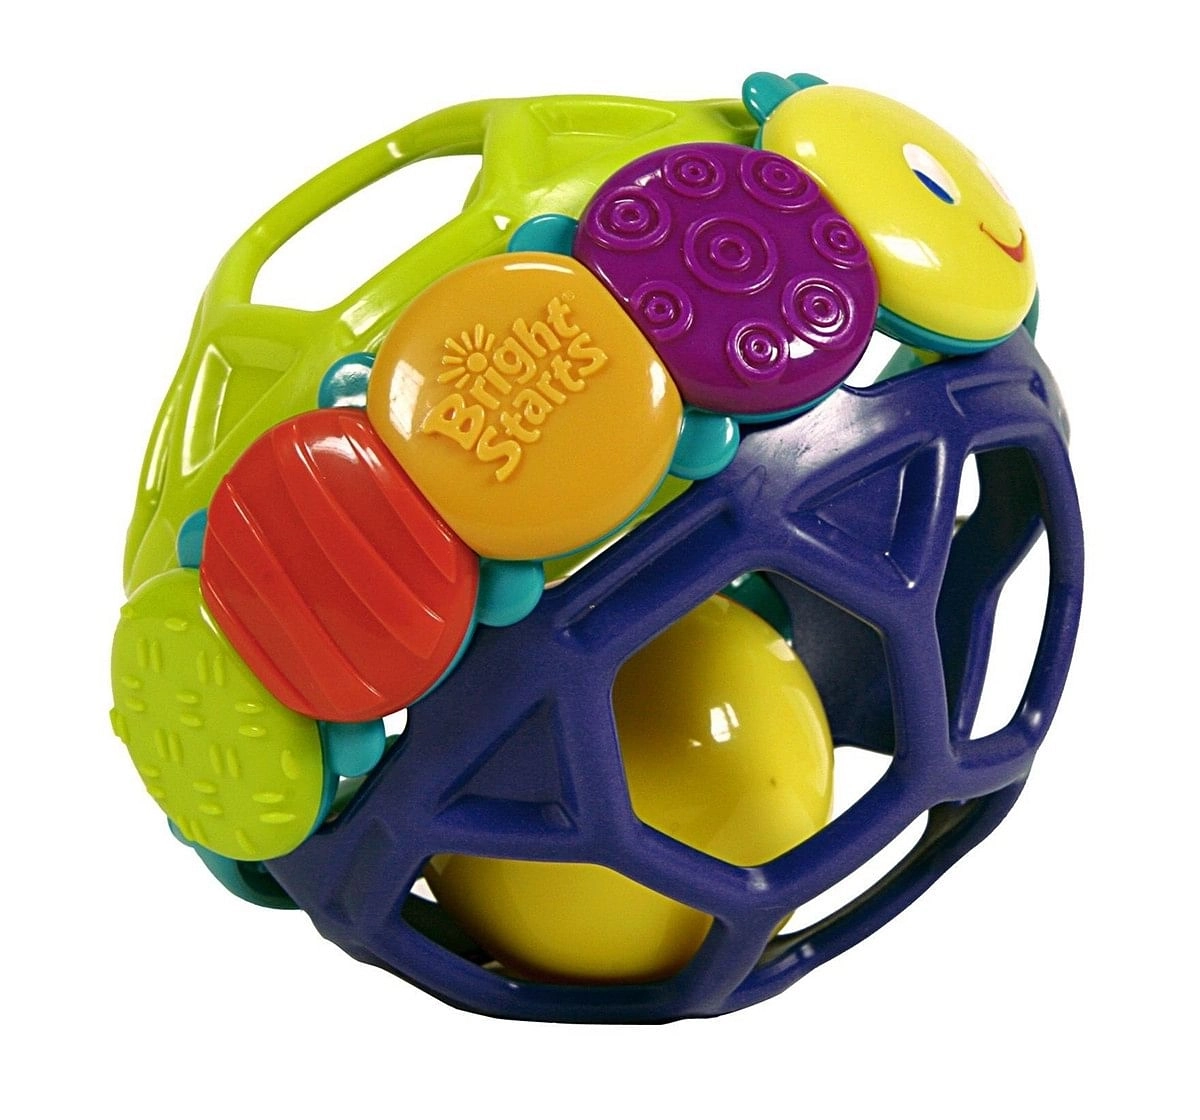 Kids Ii Bs Flexiball Early Learner Toys for age 3Y+ 